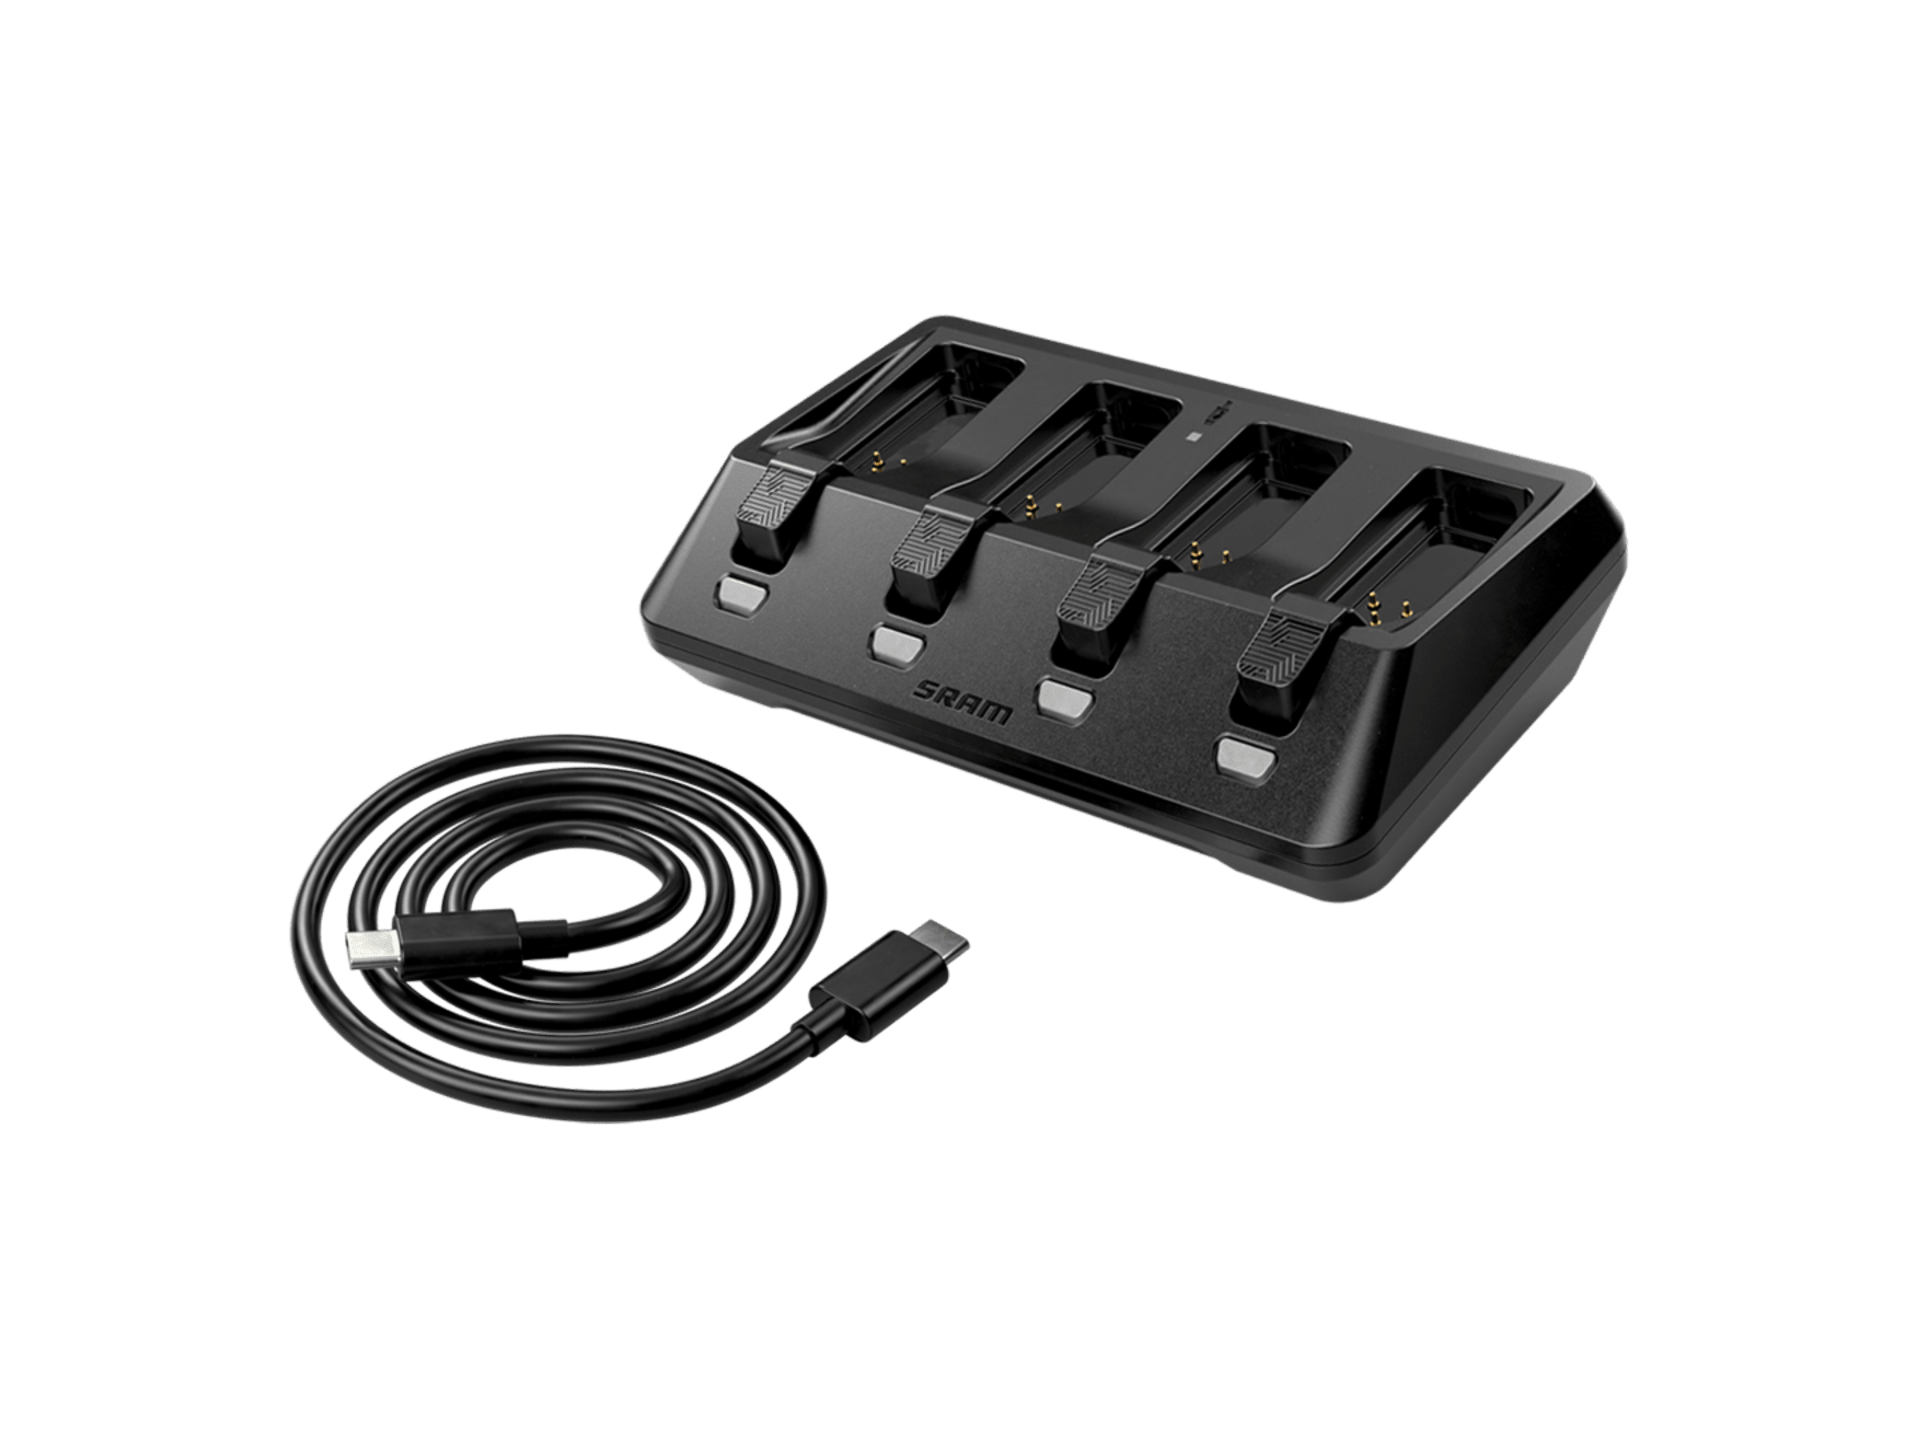 SRAM AXS Four Battery Charger